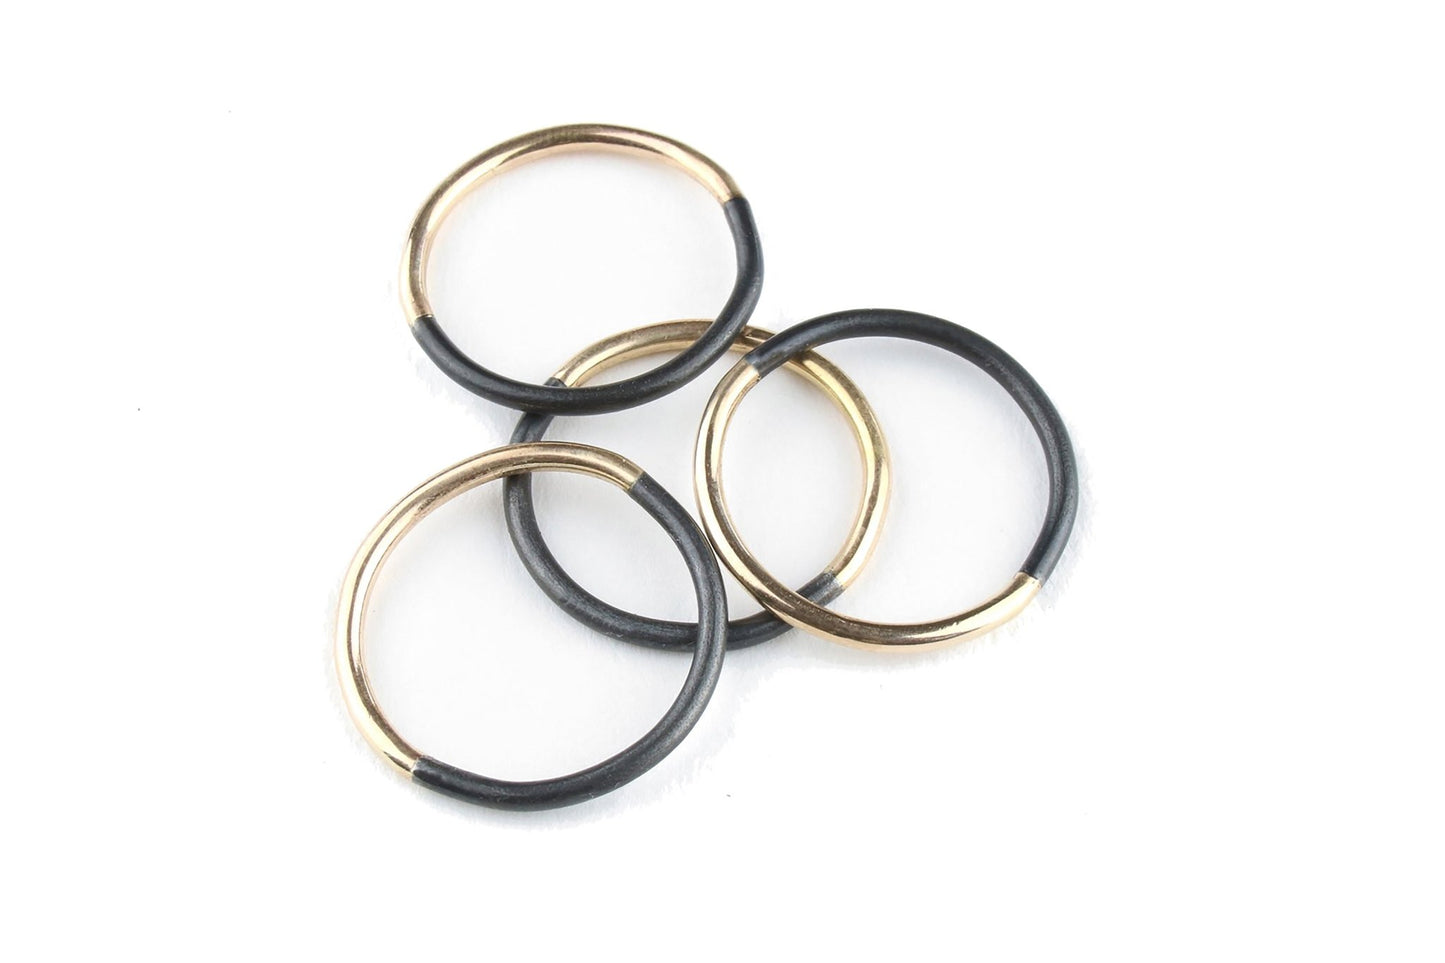 50/50 Ring in Gold and Steel -rings- Lindsey Snell